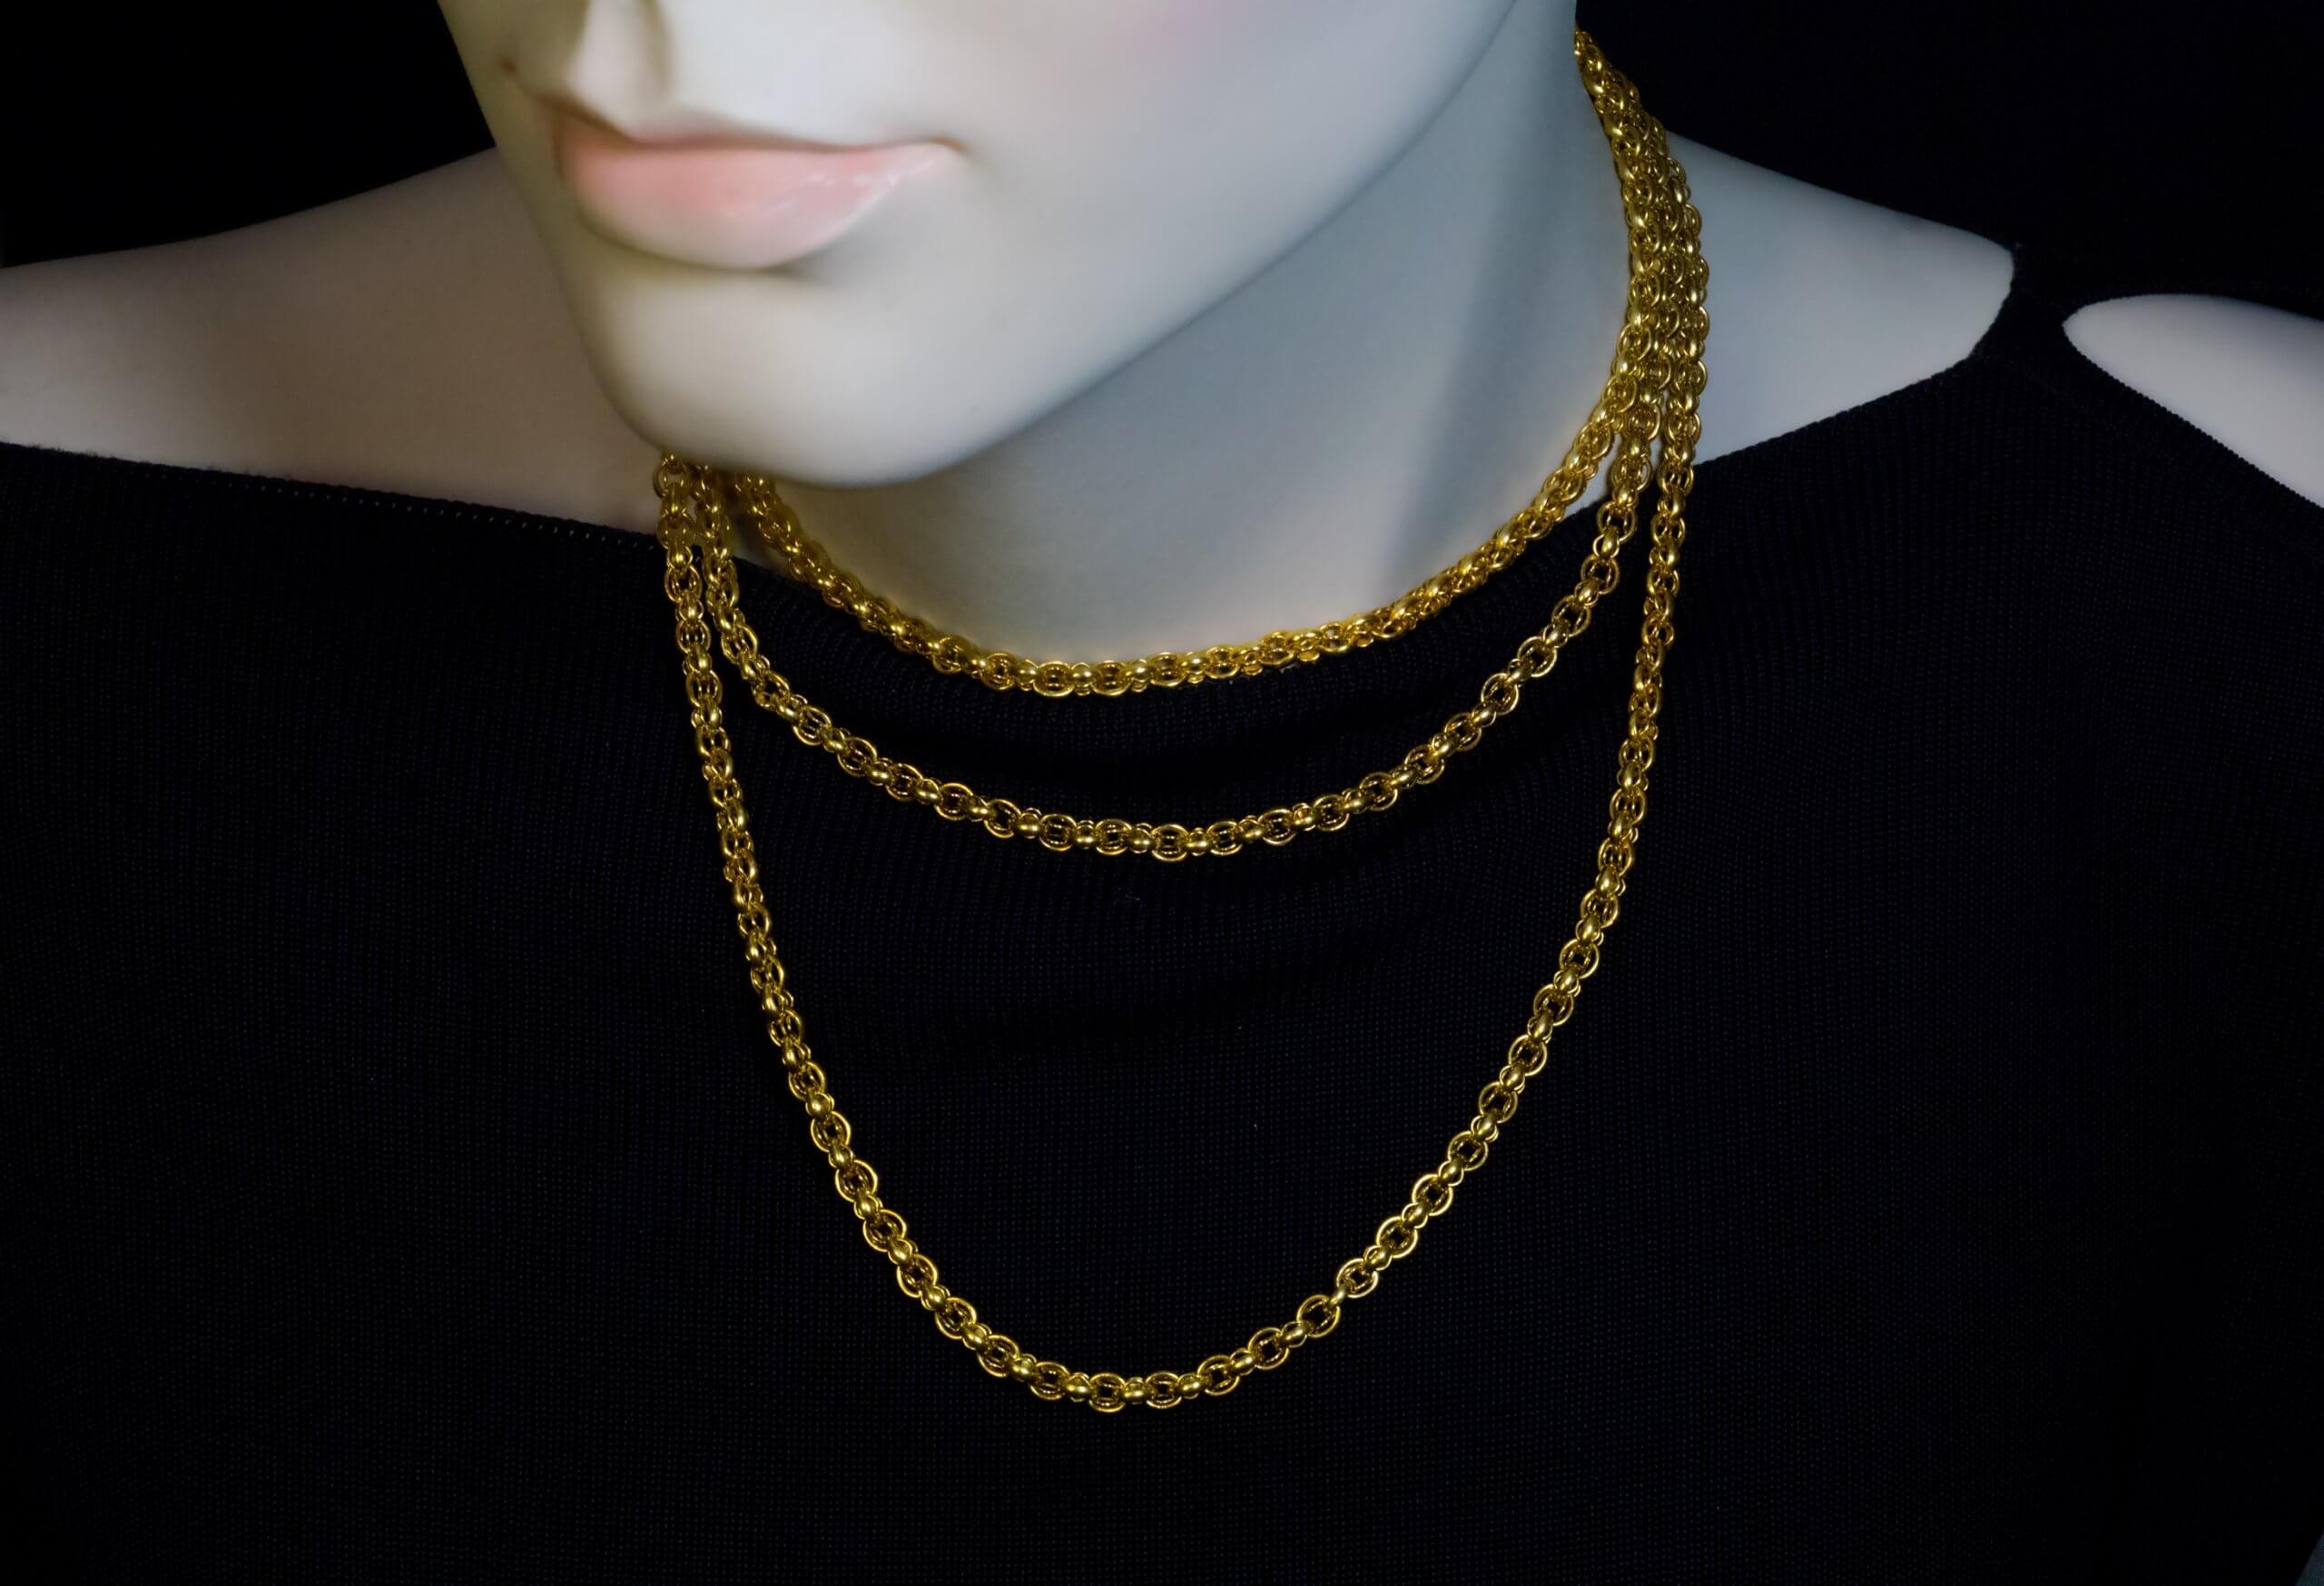 This elaborate Victorian era yellow gold chain necklace was made in the 19th century, circa 1850s-1870s.  The gold of the necklace was tested to be in the 17 to 18 karat range.  Length is 124 cm (48 in.)  Width is 5 mm (3/16 in.)  Weight is 75